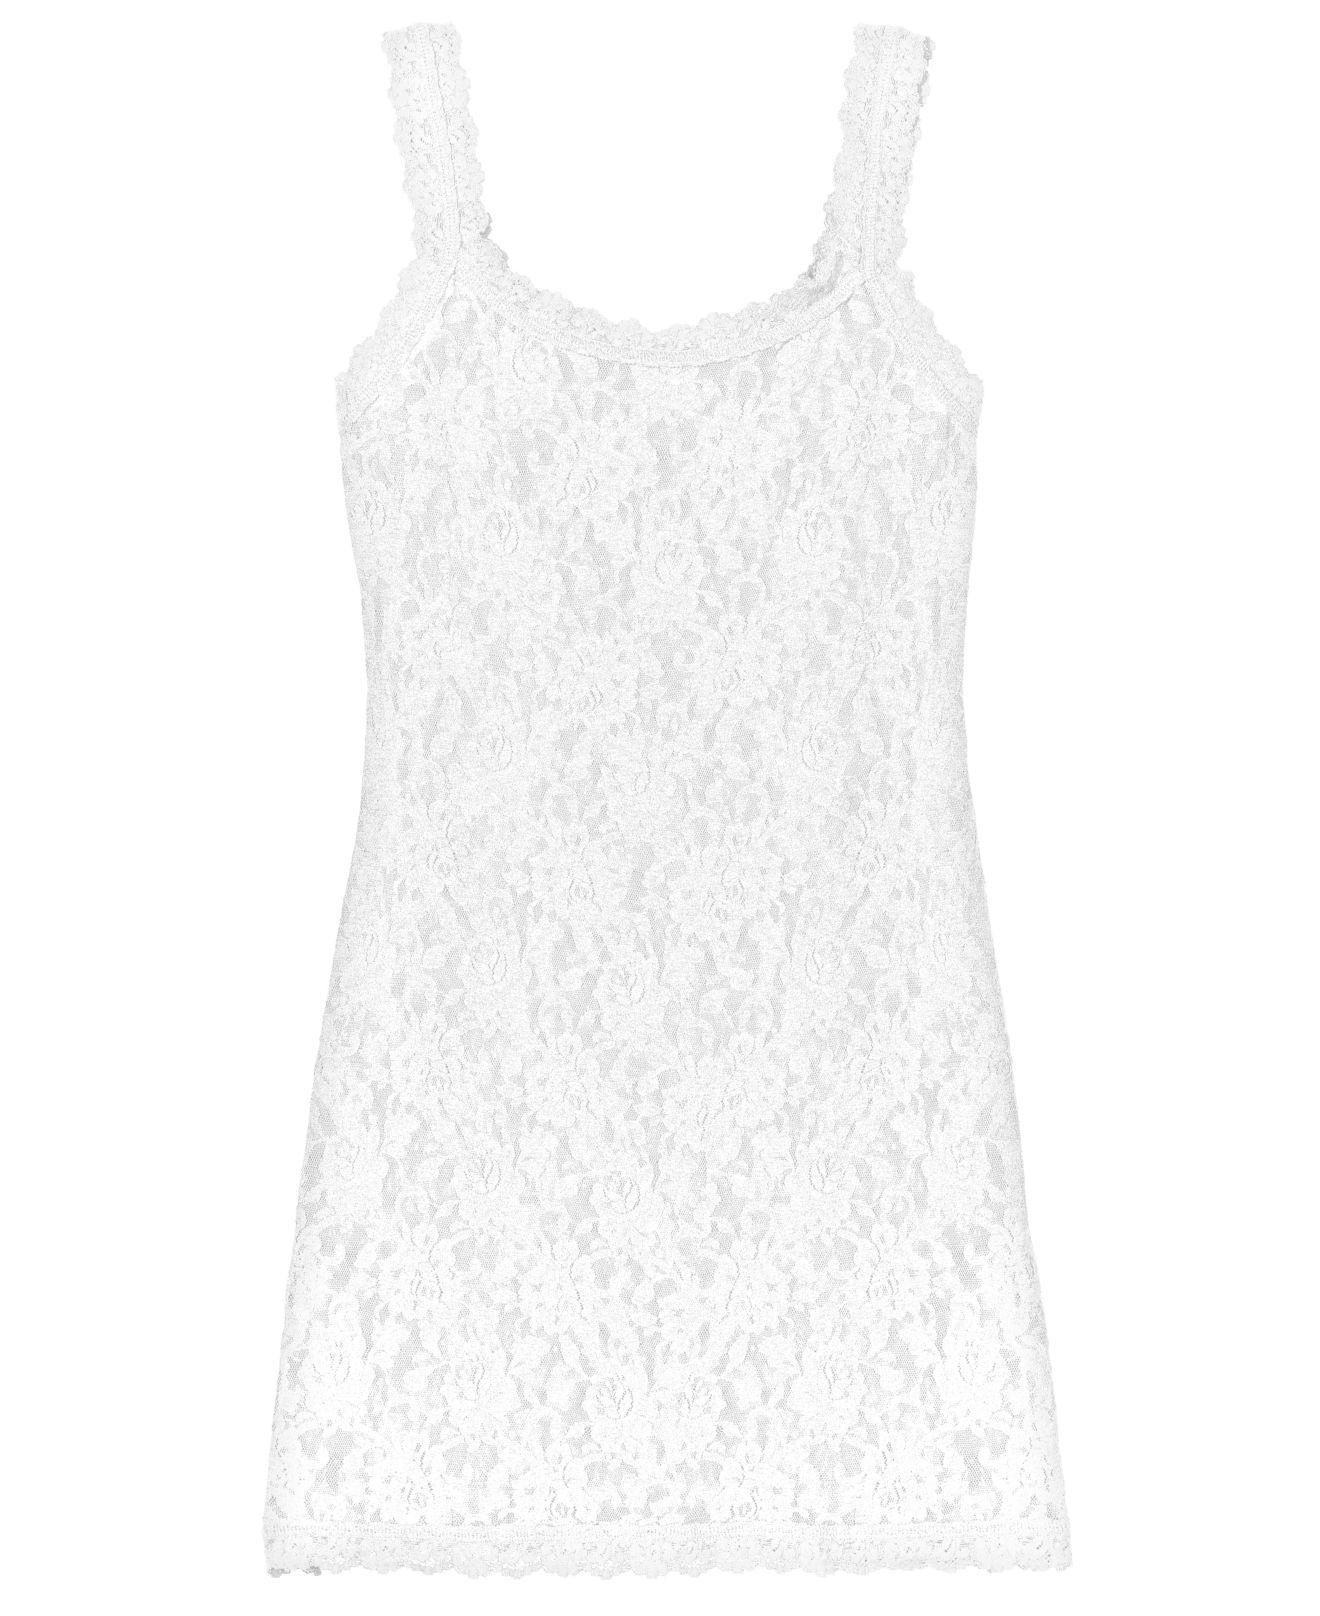 Hanky Panky Signature Lace Camisole 1390l in White - Lyst